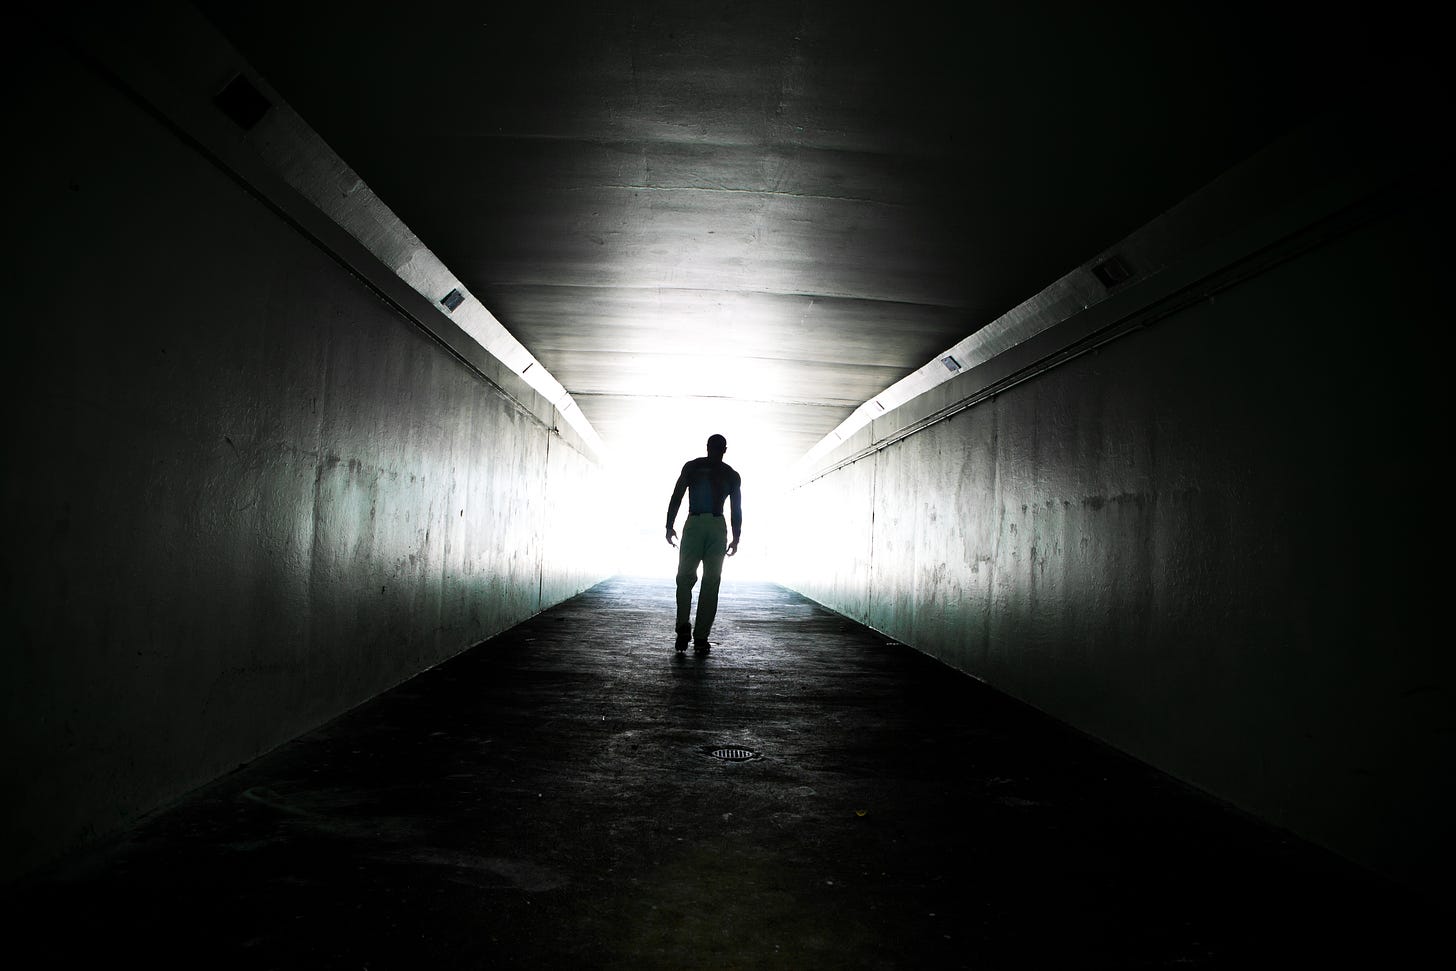 A Black and white image of the receding figure of a man in a darkened tunnel.